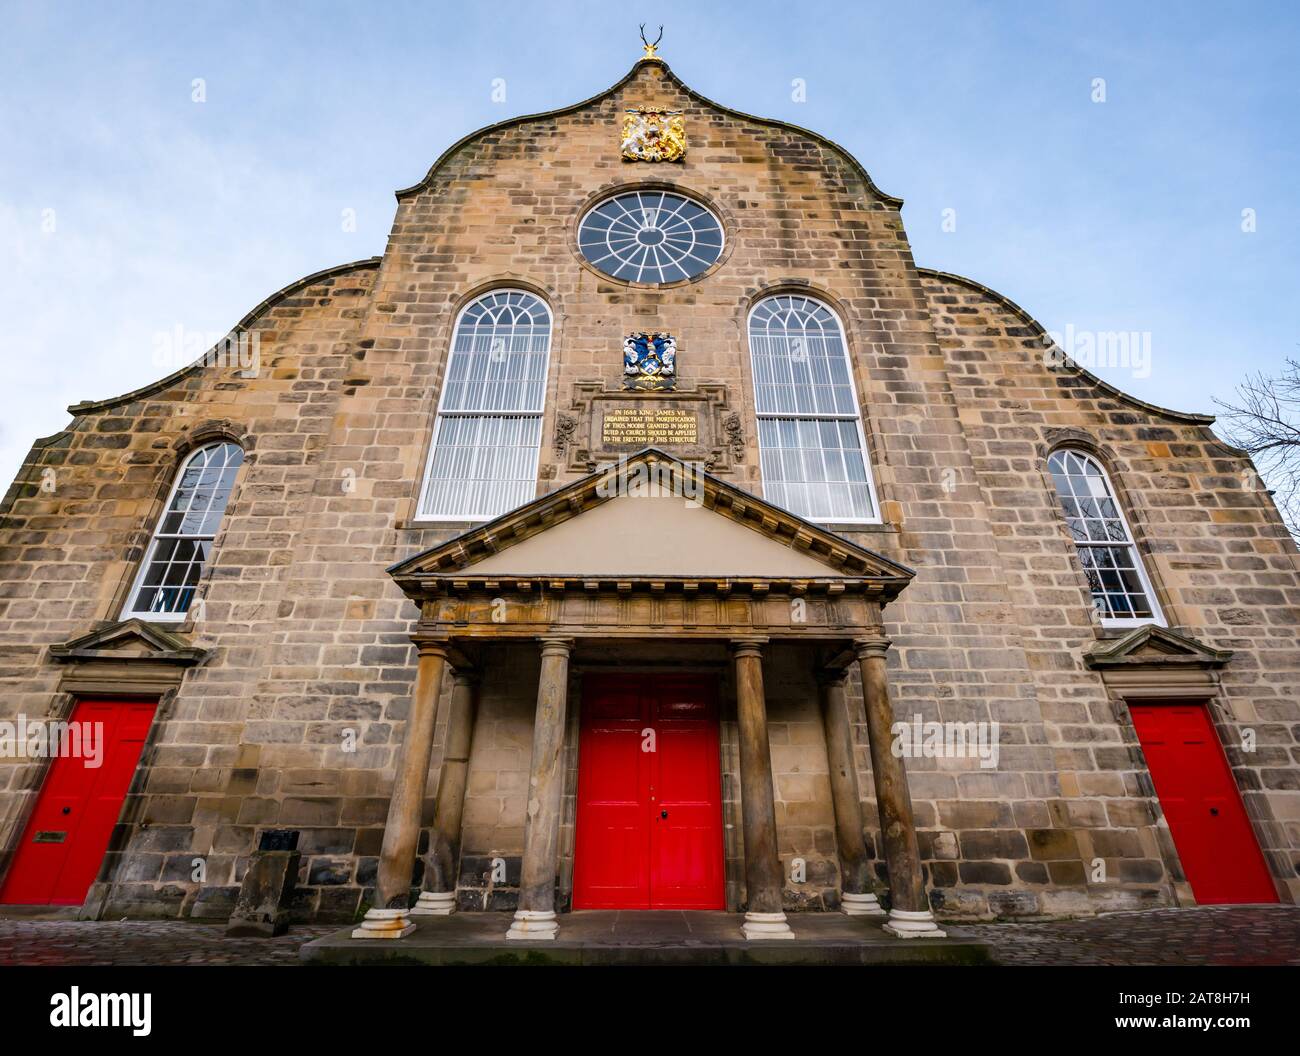 Newly restored Dutch style 17th century Canongate Kirk or Church with portico and red doors, Royal Mile, Edinburgh, Scotland, UK Stock Photo